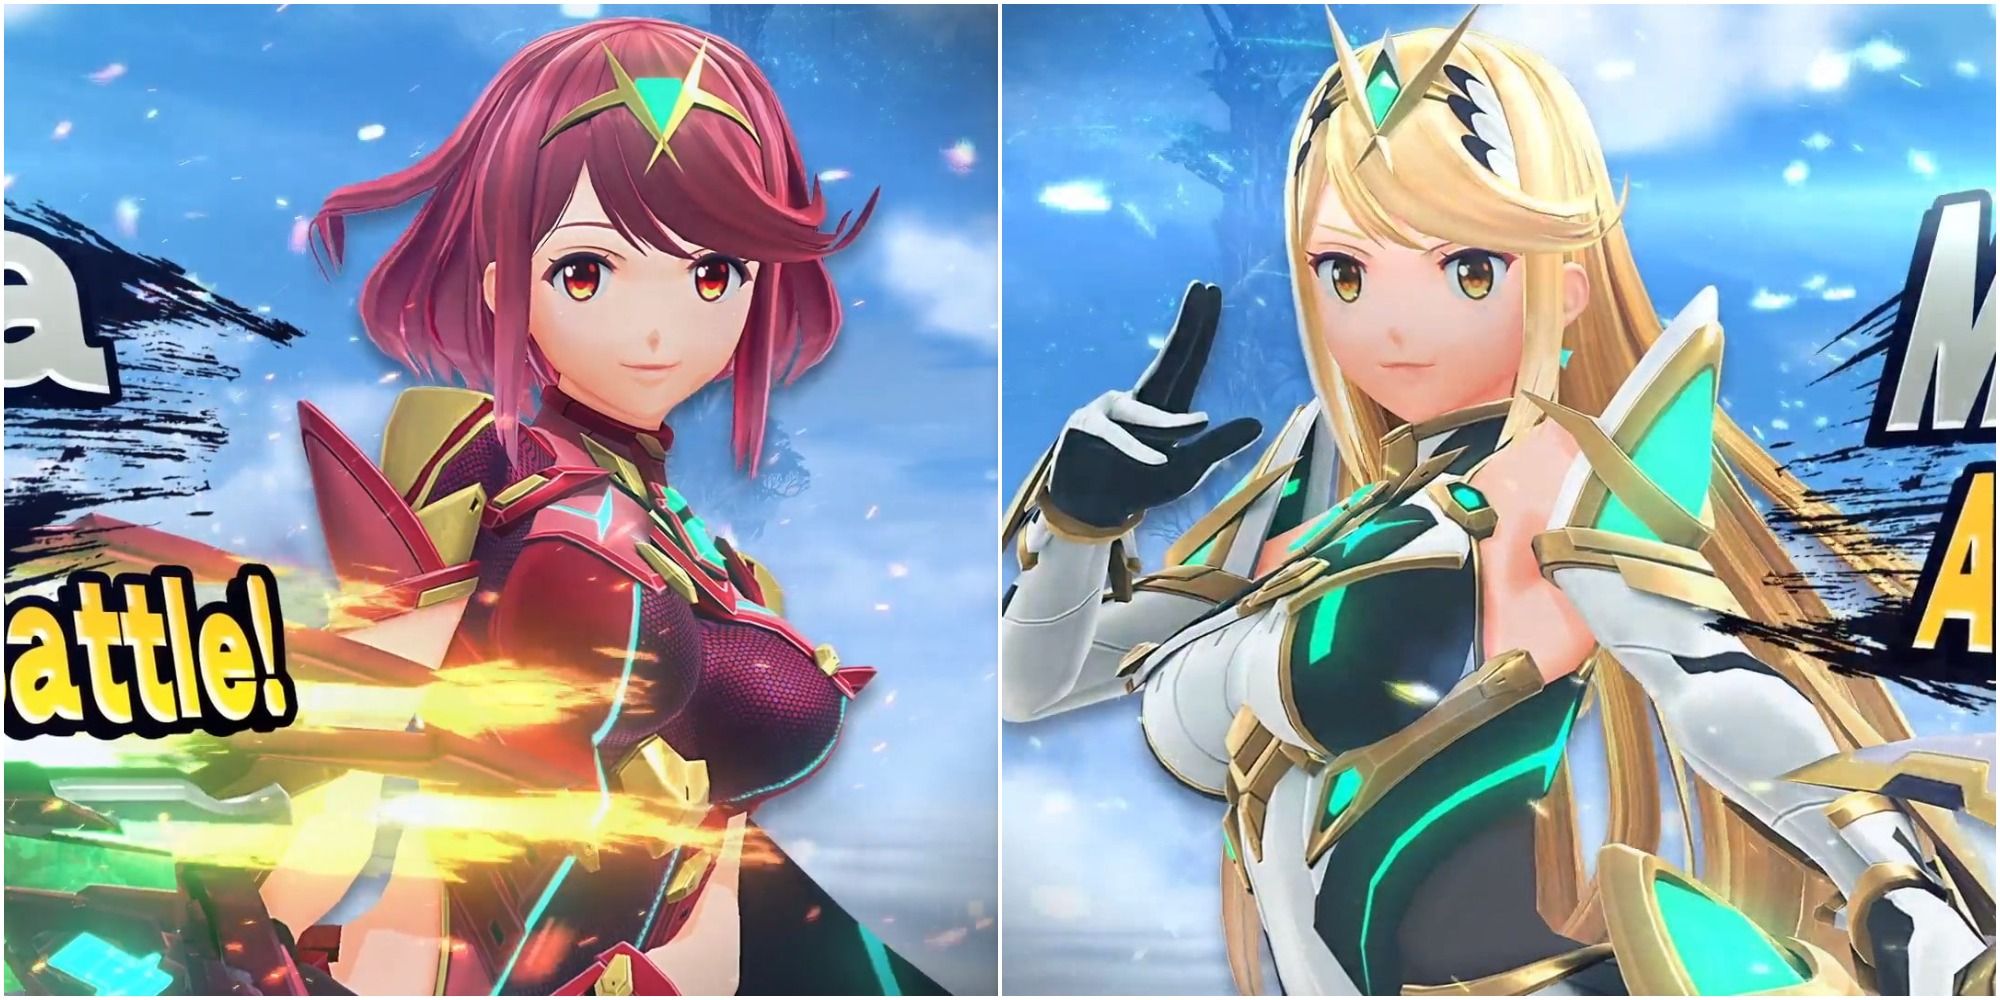 Pyra and Mythra from Xenoblade Chronicles 2 As Guest DLC Characters in Super Smash Bros. Ultimate